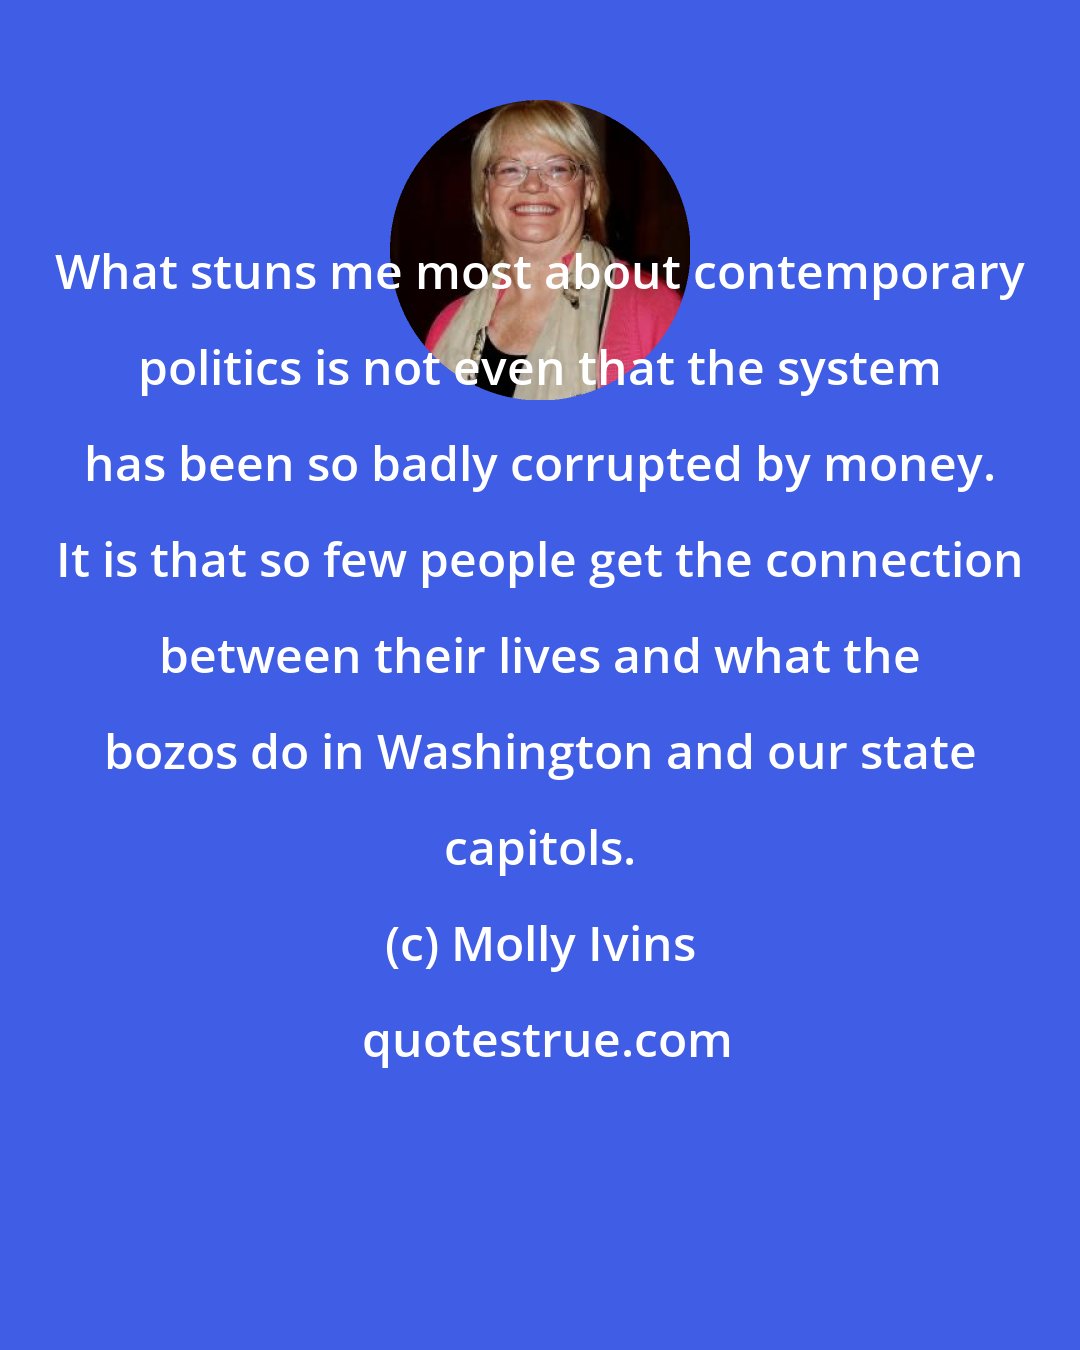 Molly Ivins: What stuns me most about contemporary politics is not even that the system has been so badly corrupted by money. It is that so few people get the connection between their lives and what the bozos do in Washington and our state capitols.